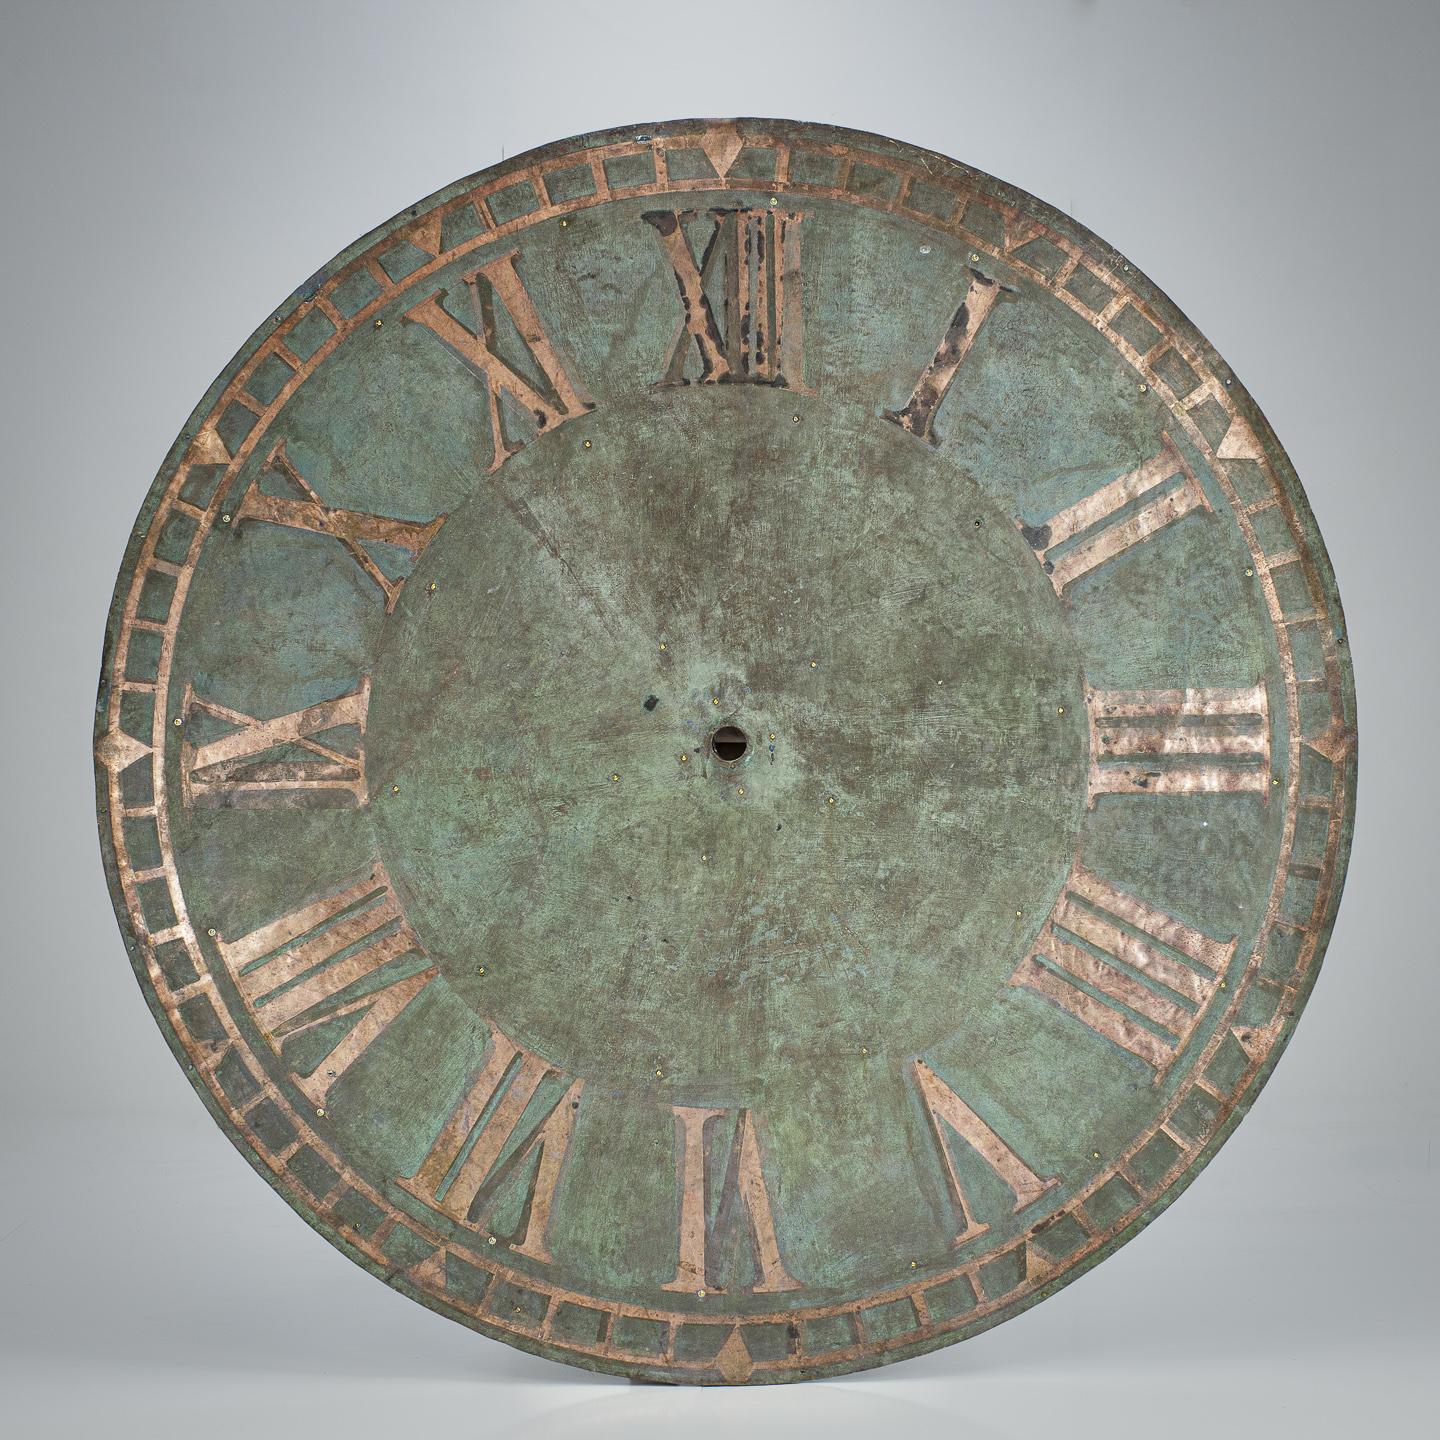 Extraordinary, Monumental scale copper clock face. Natural verdigris patination. England. Early 20th Century. Fixed to later board backing for stability and hanging. Provenance St James Chapel, Okehampton, Devon, UK.